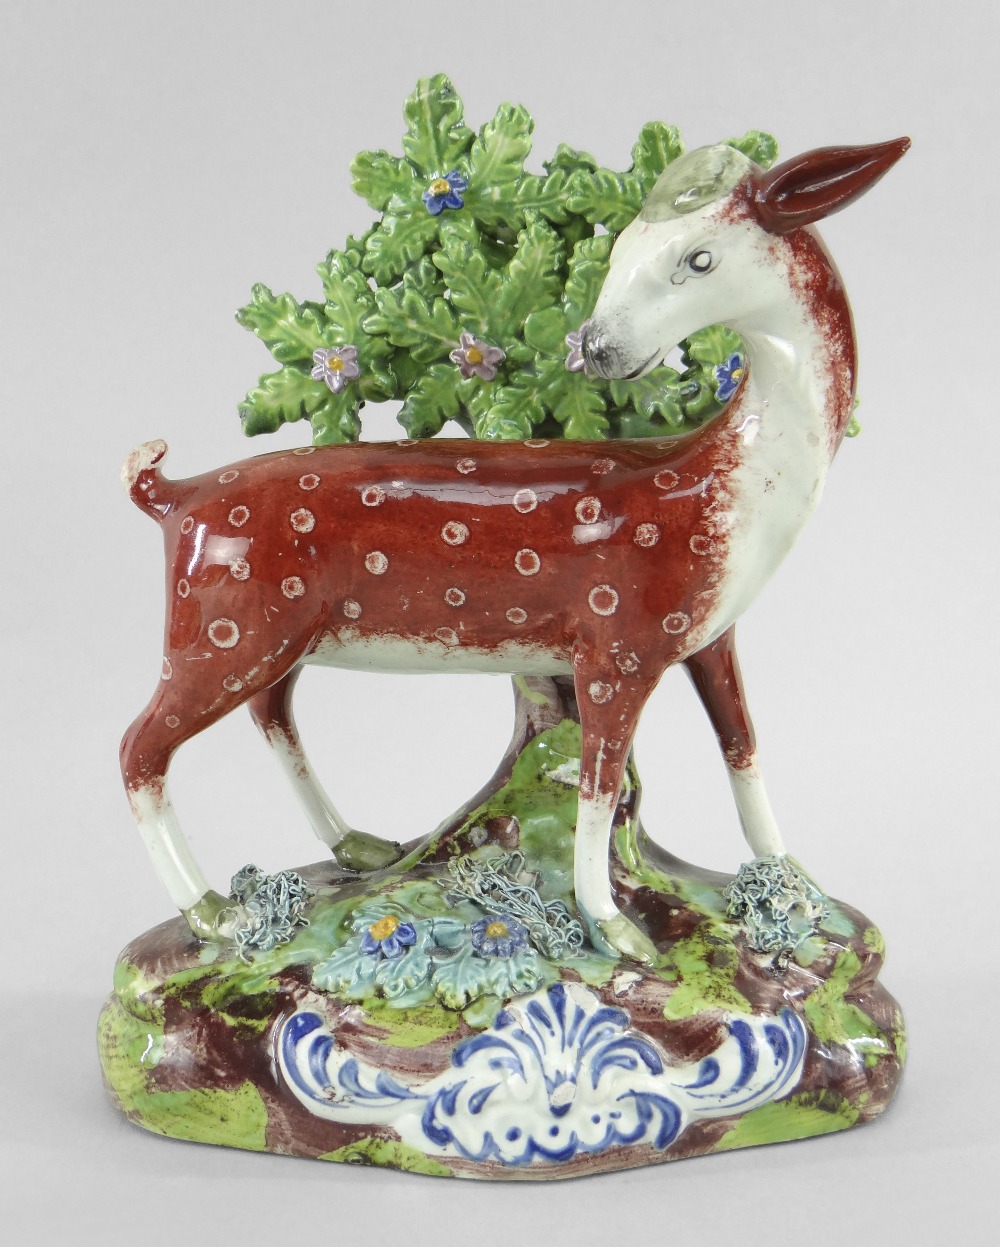 STAFFORDSHIRE PEARLWARE FIGURE OF A DOE c. 1820 - Image 5 of 8